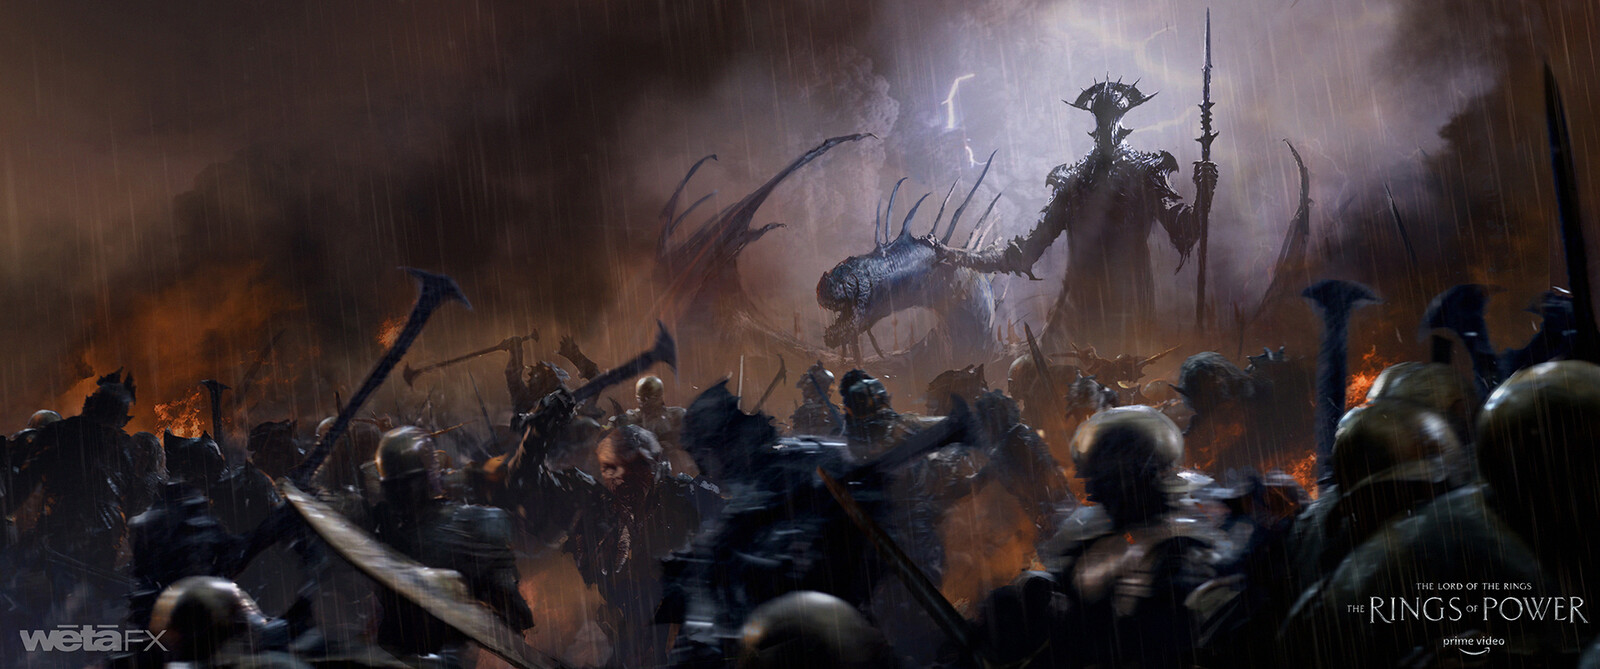 This art was in fact extrapolating some of the ideas from the former keyframe and using them instead for Sauron surveying the battle scene. 